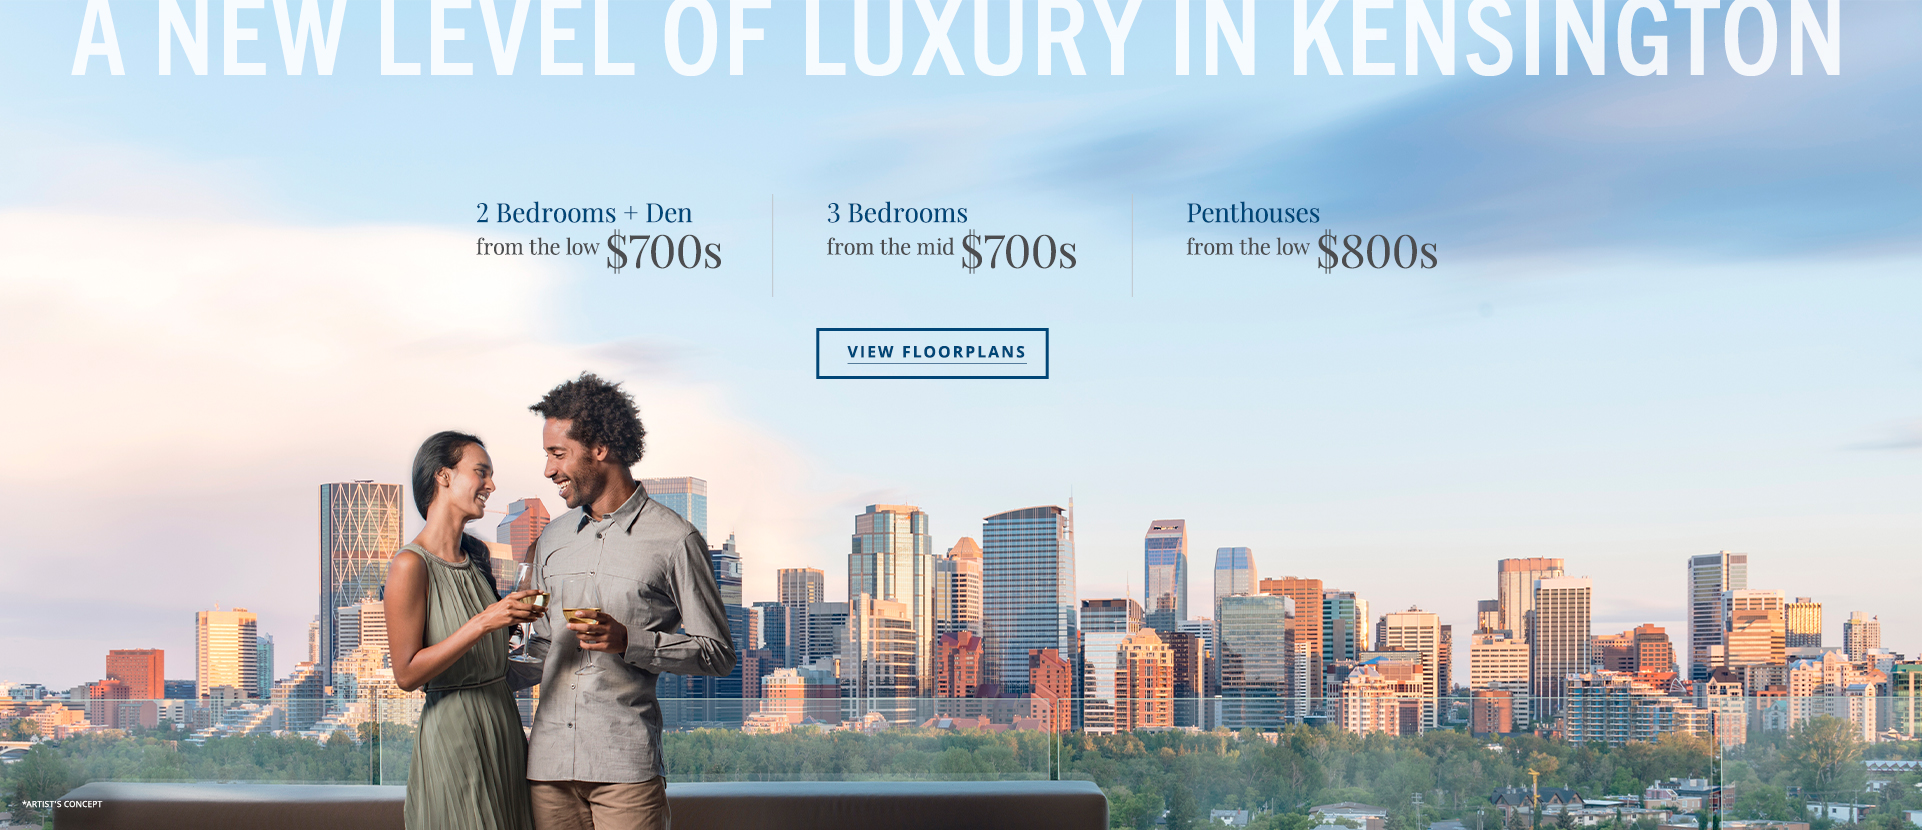 graphic: Man and woman standing on the balcony with the Calgary skyline in the background. text: A new level of luxury in Kensington. The Reserve Collection at the Theodore